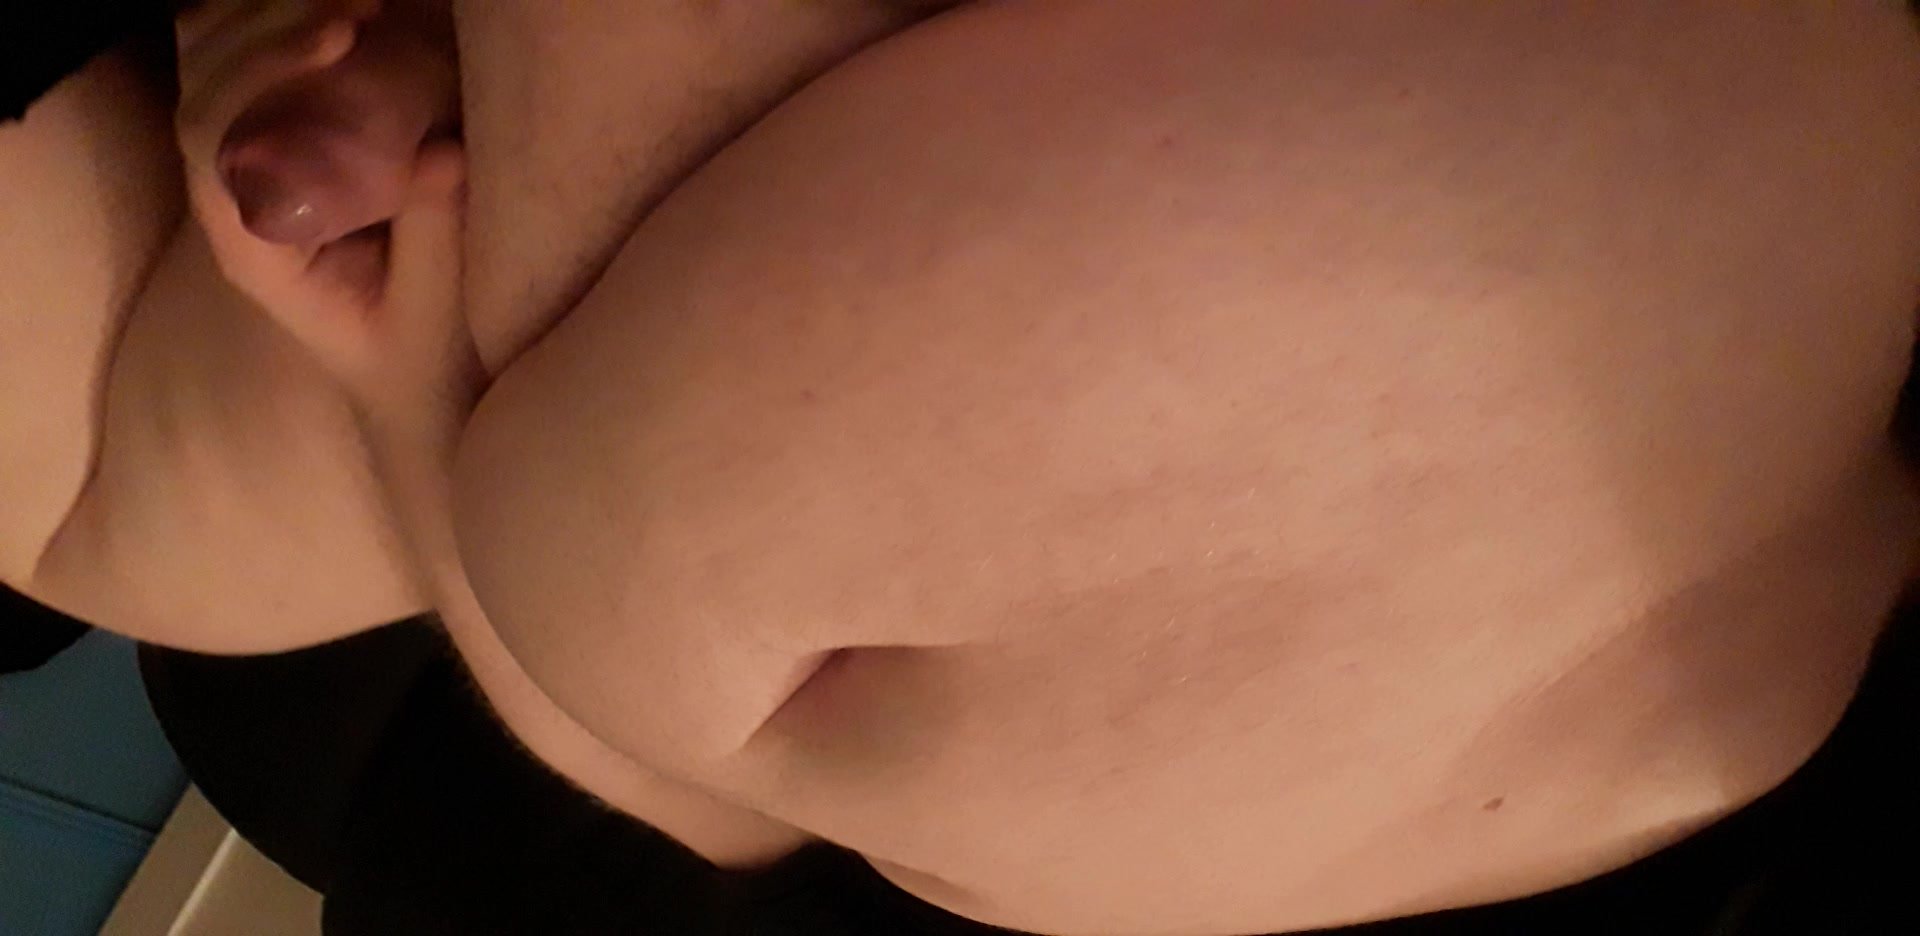 Fat pig shows off his tiny cock and huge belly